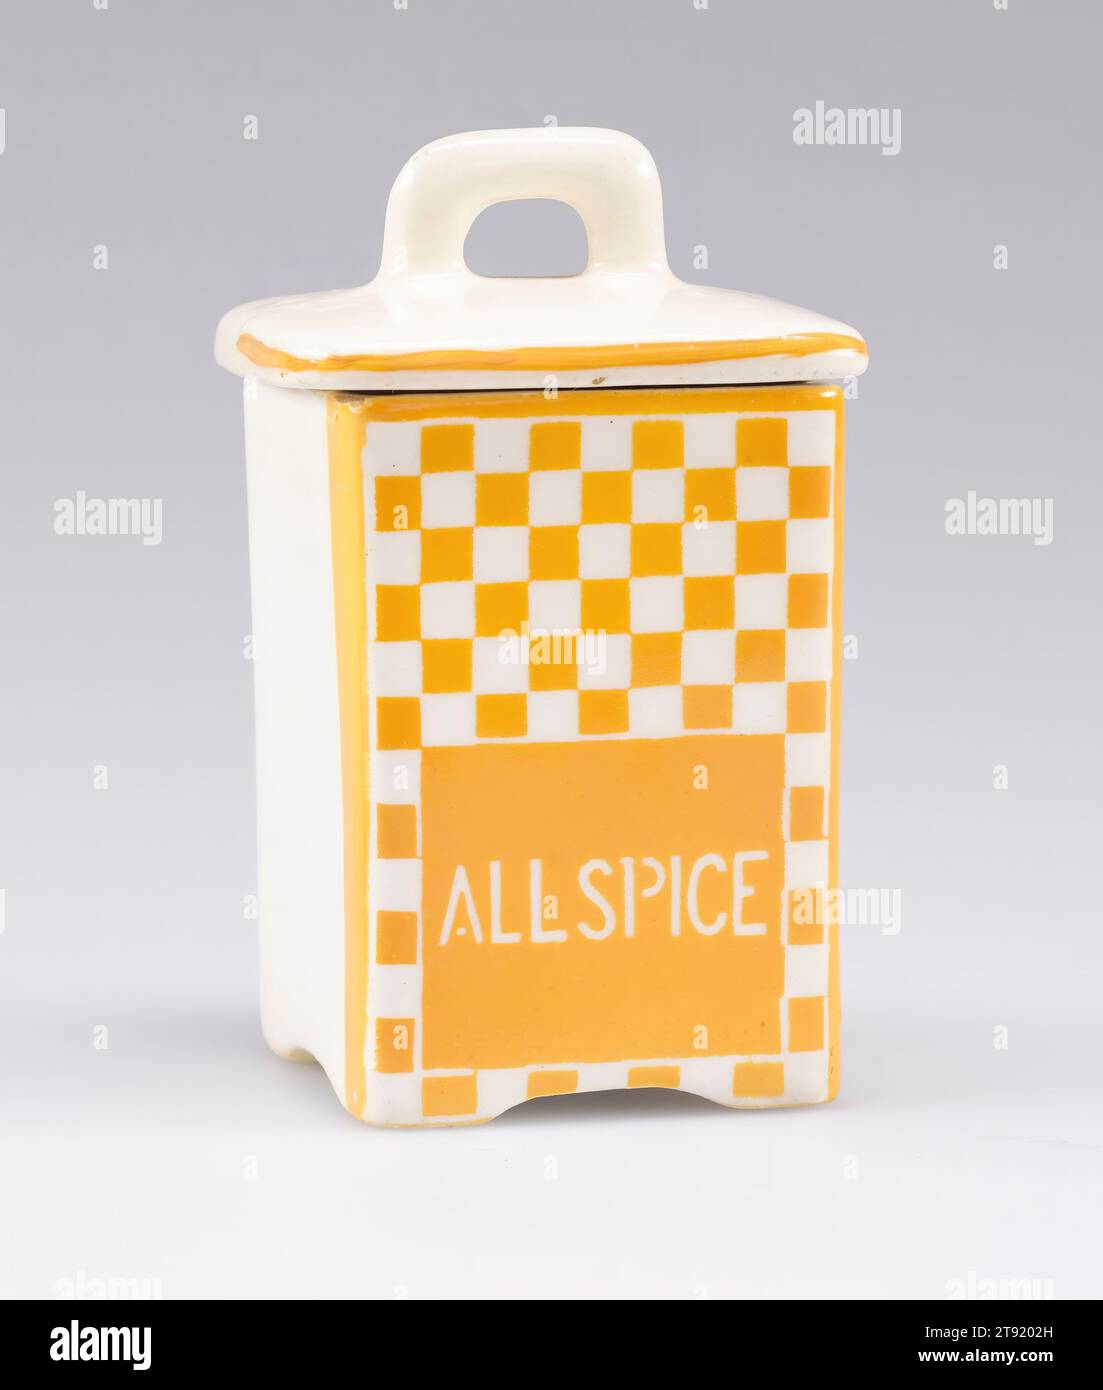 Allspice container, from a 15-piece kitchen container set, 20th century, 4 1/16 x 2 7/16 x 2 3/8 in. (10.32 x 6.19 x 6.03 cm), Glazed porcelain, Czechoslovakia, 20th century Stock Photo